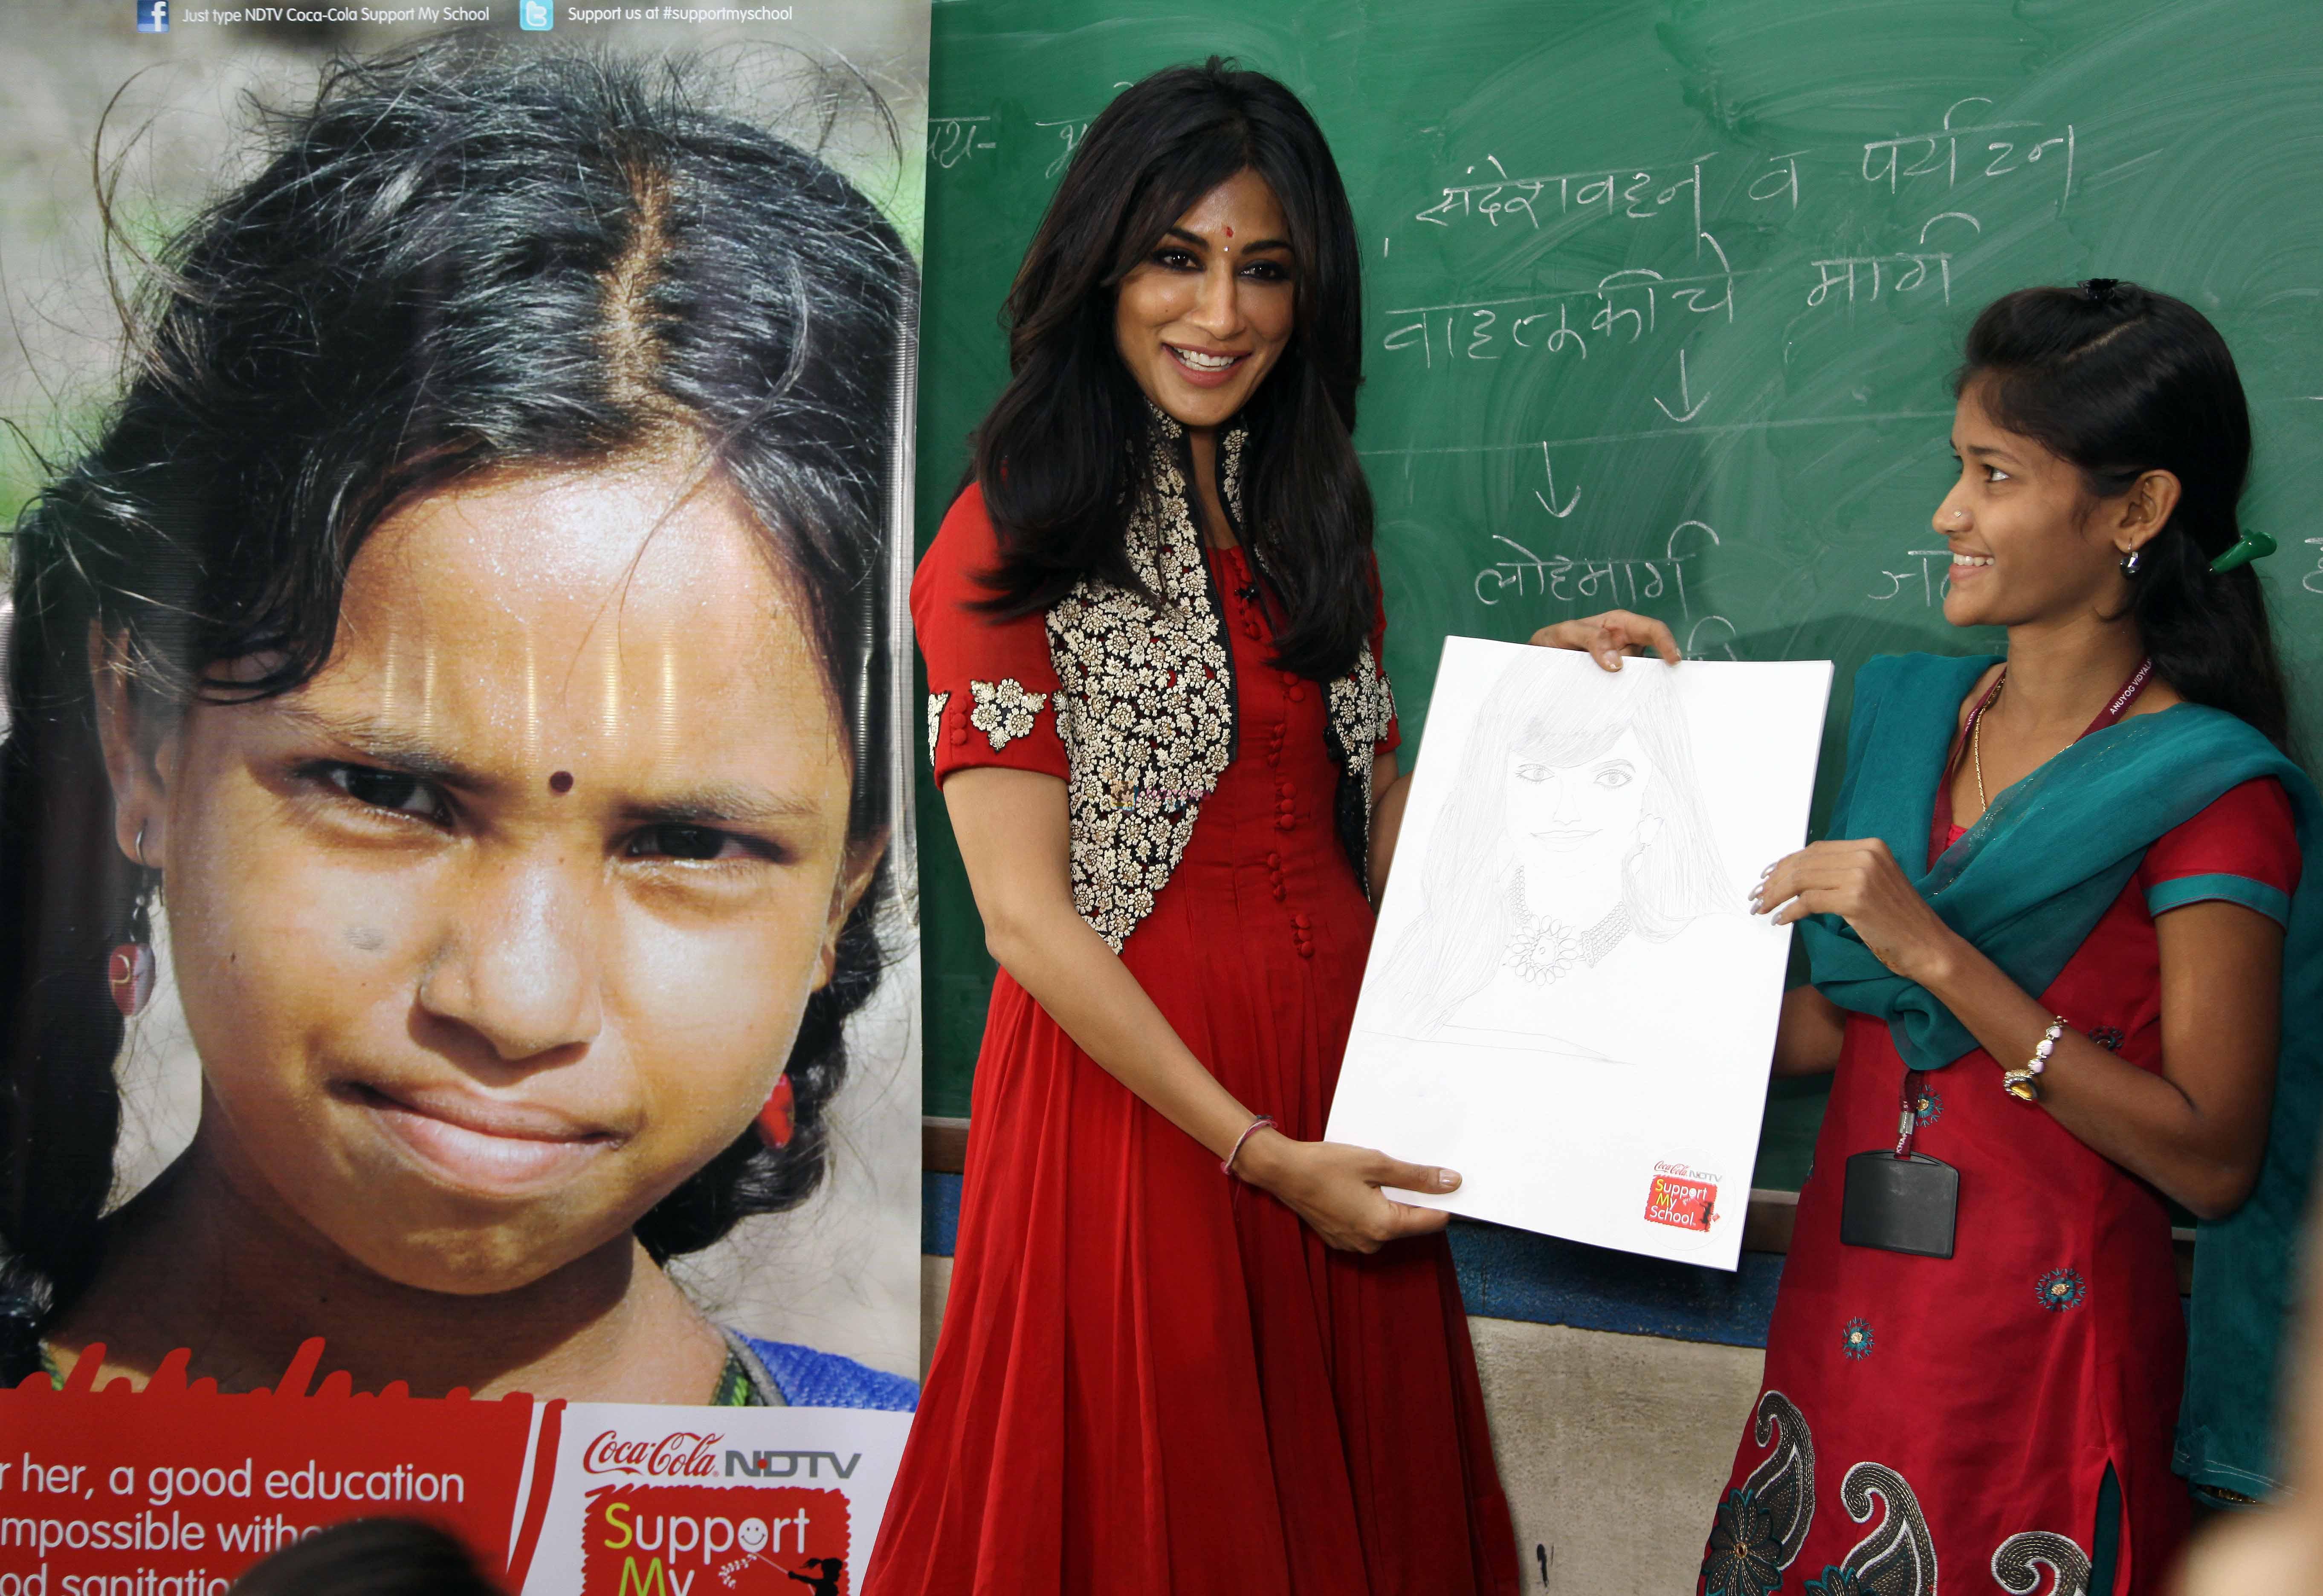 Chitrangada Singh with the students of the Anuyog Vidyalaya pledged under Coca-Cola NDTV Support My School Campaign on Sexual harassment problems to the girls on 8th Jan 2013